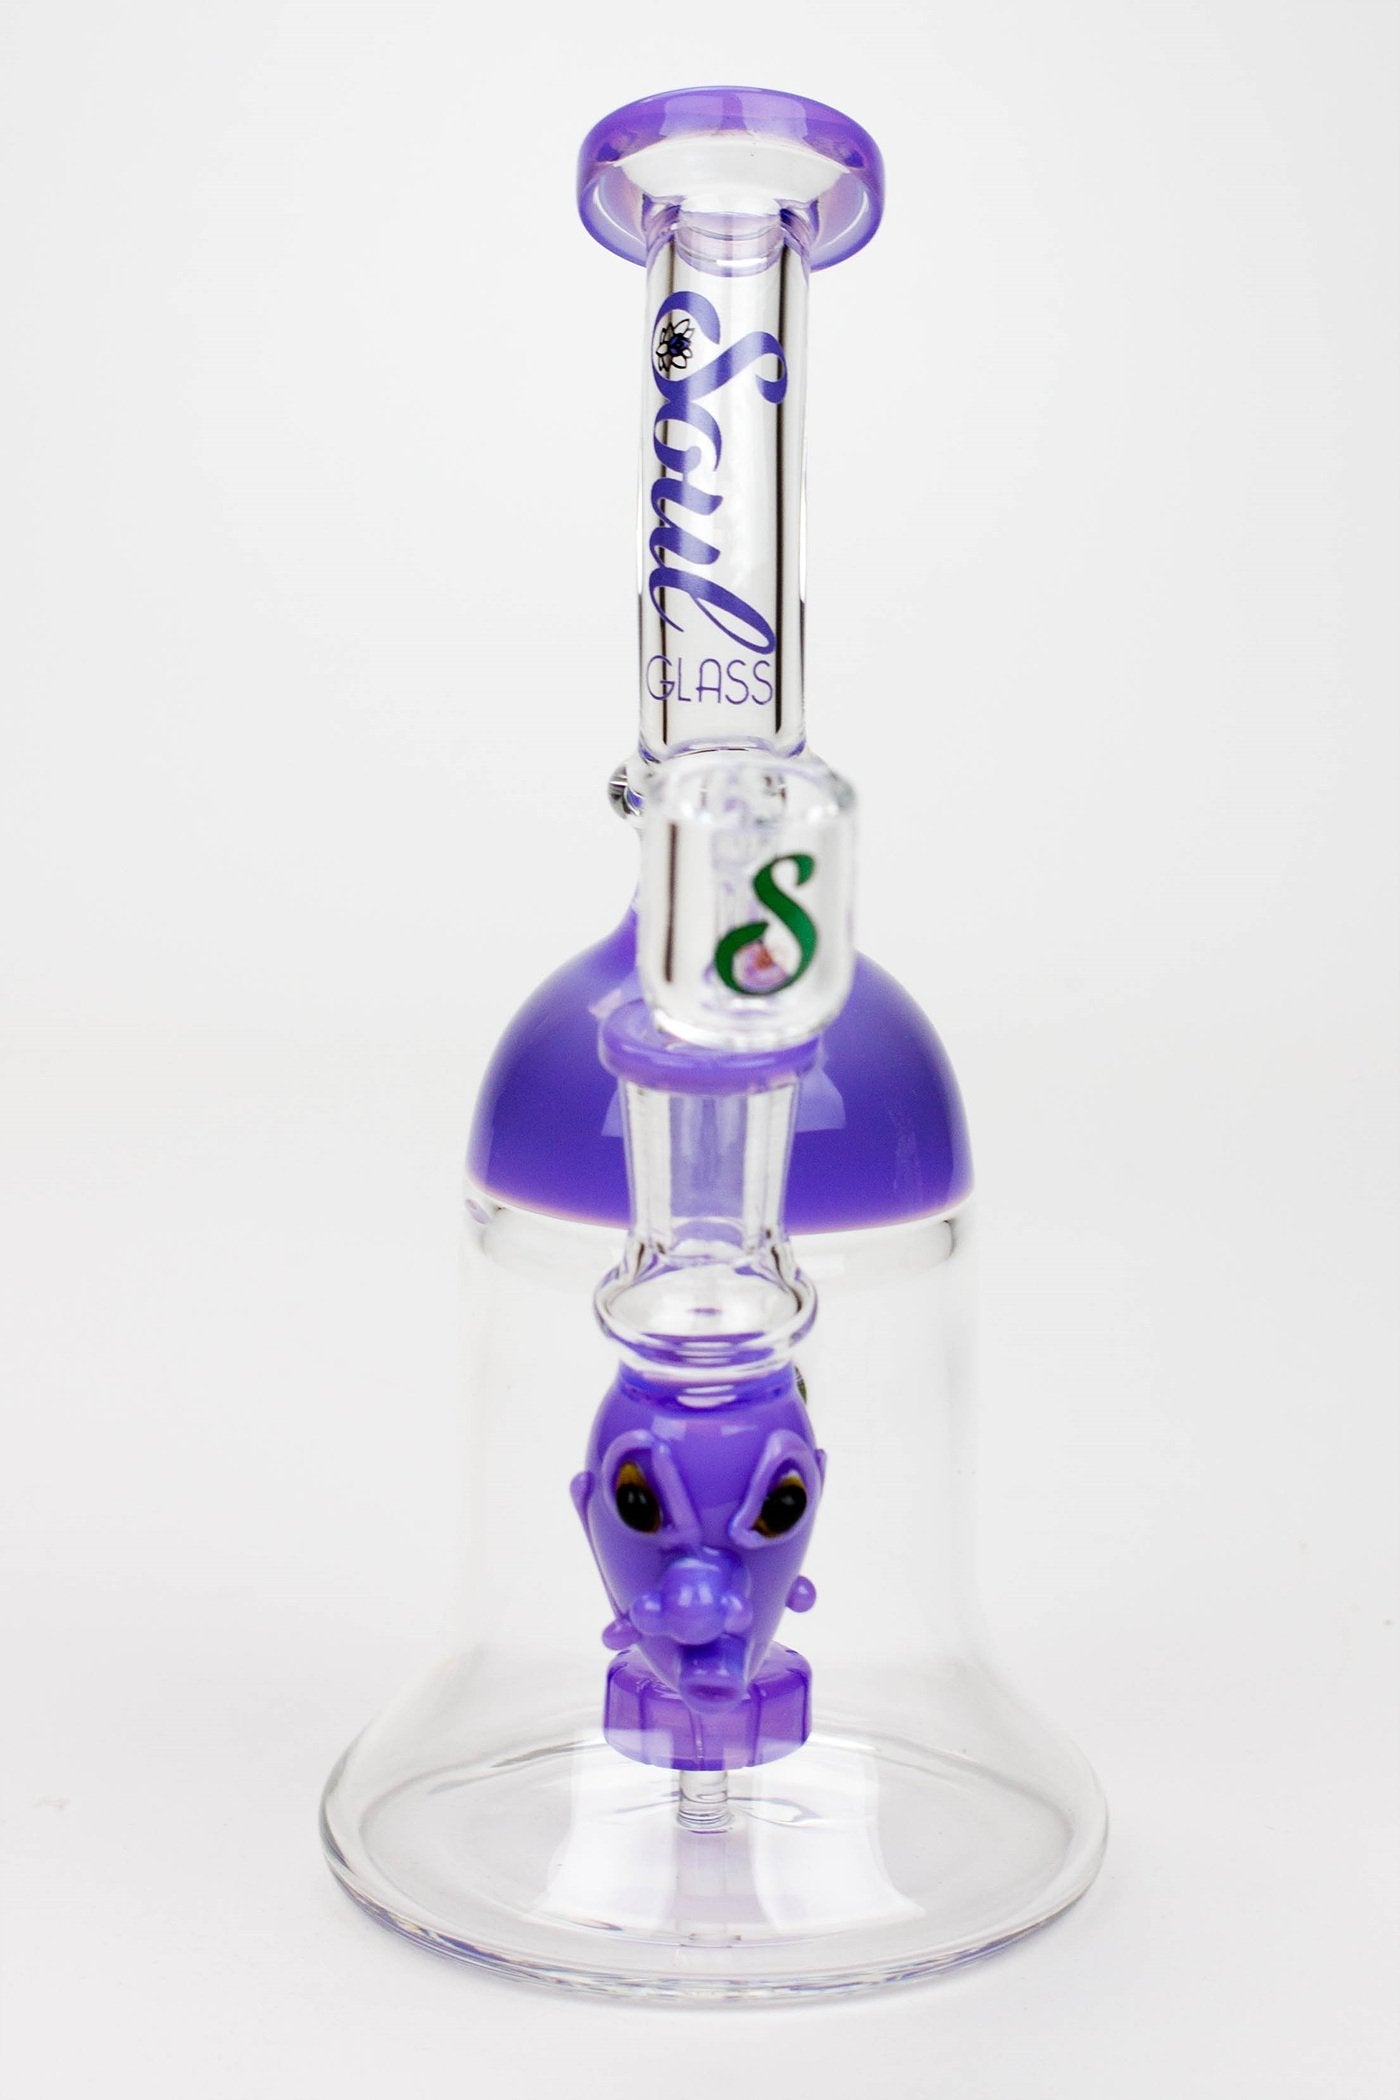 8.5" SOUL Glass 2-in-1 show head diffuser bong_10